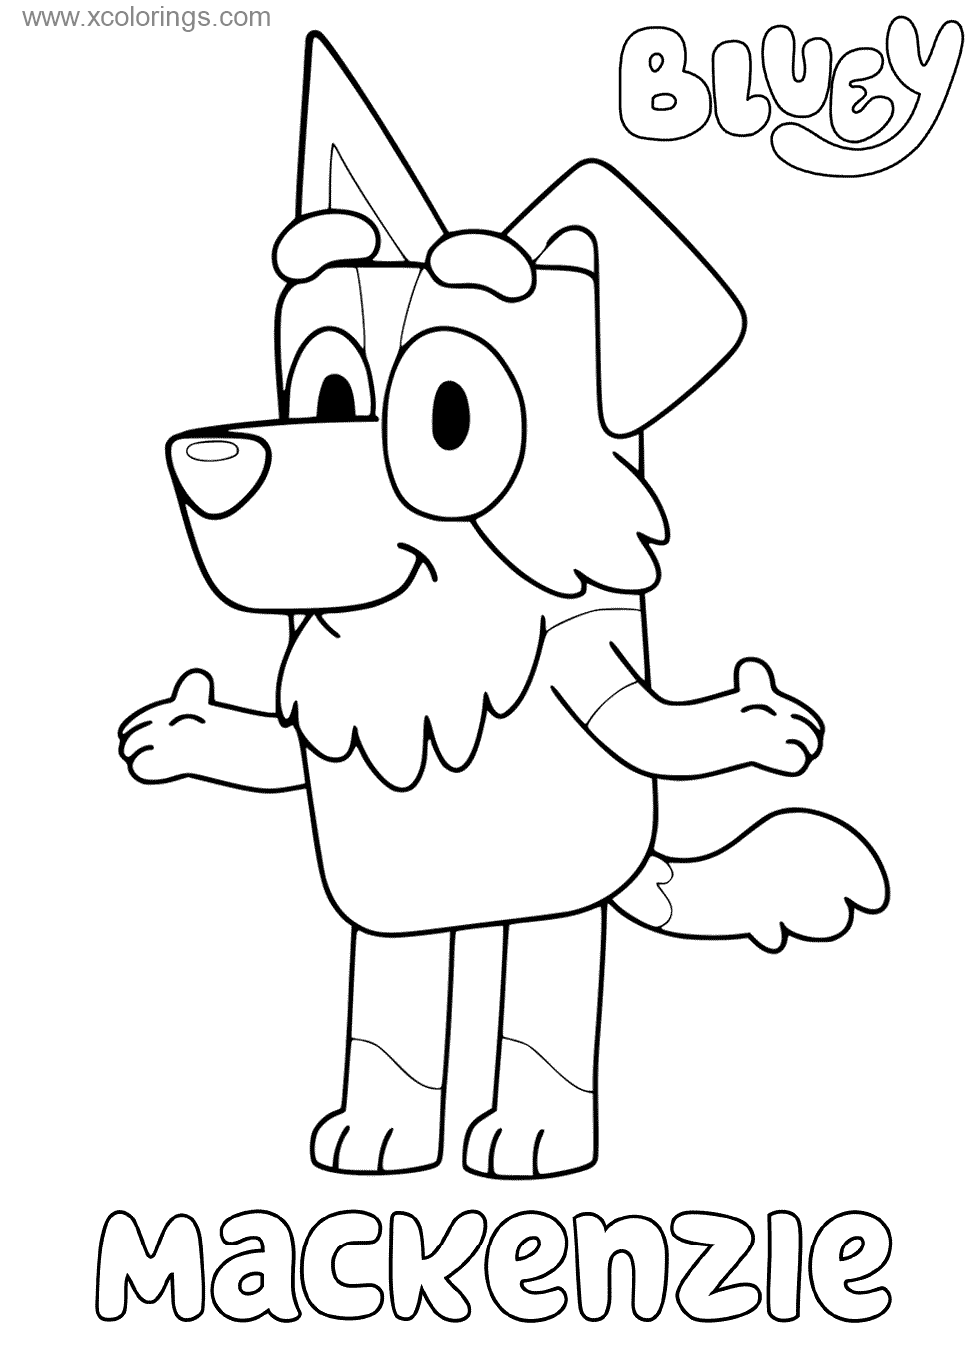 bluey-character-mackenzie-coloring-pages-xcolorings